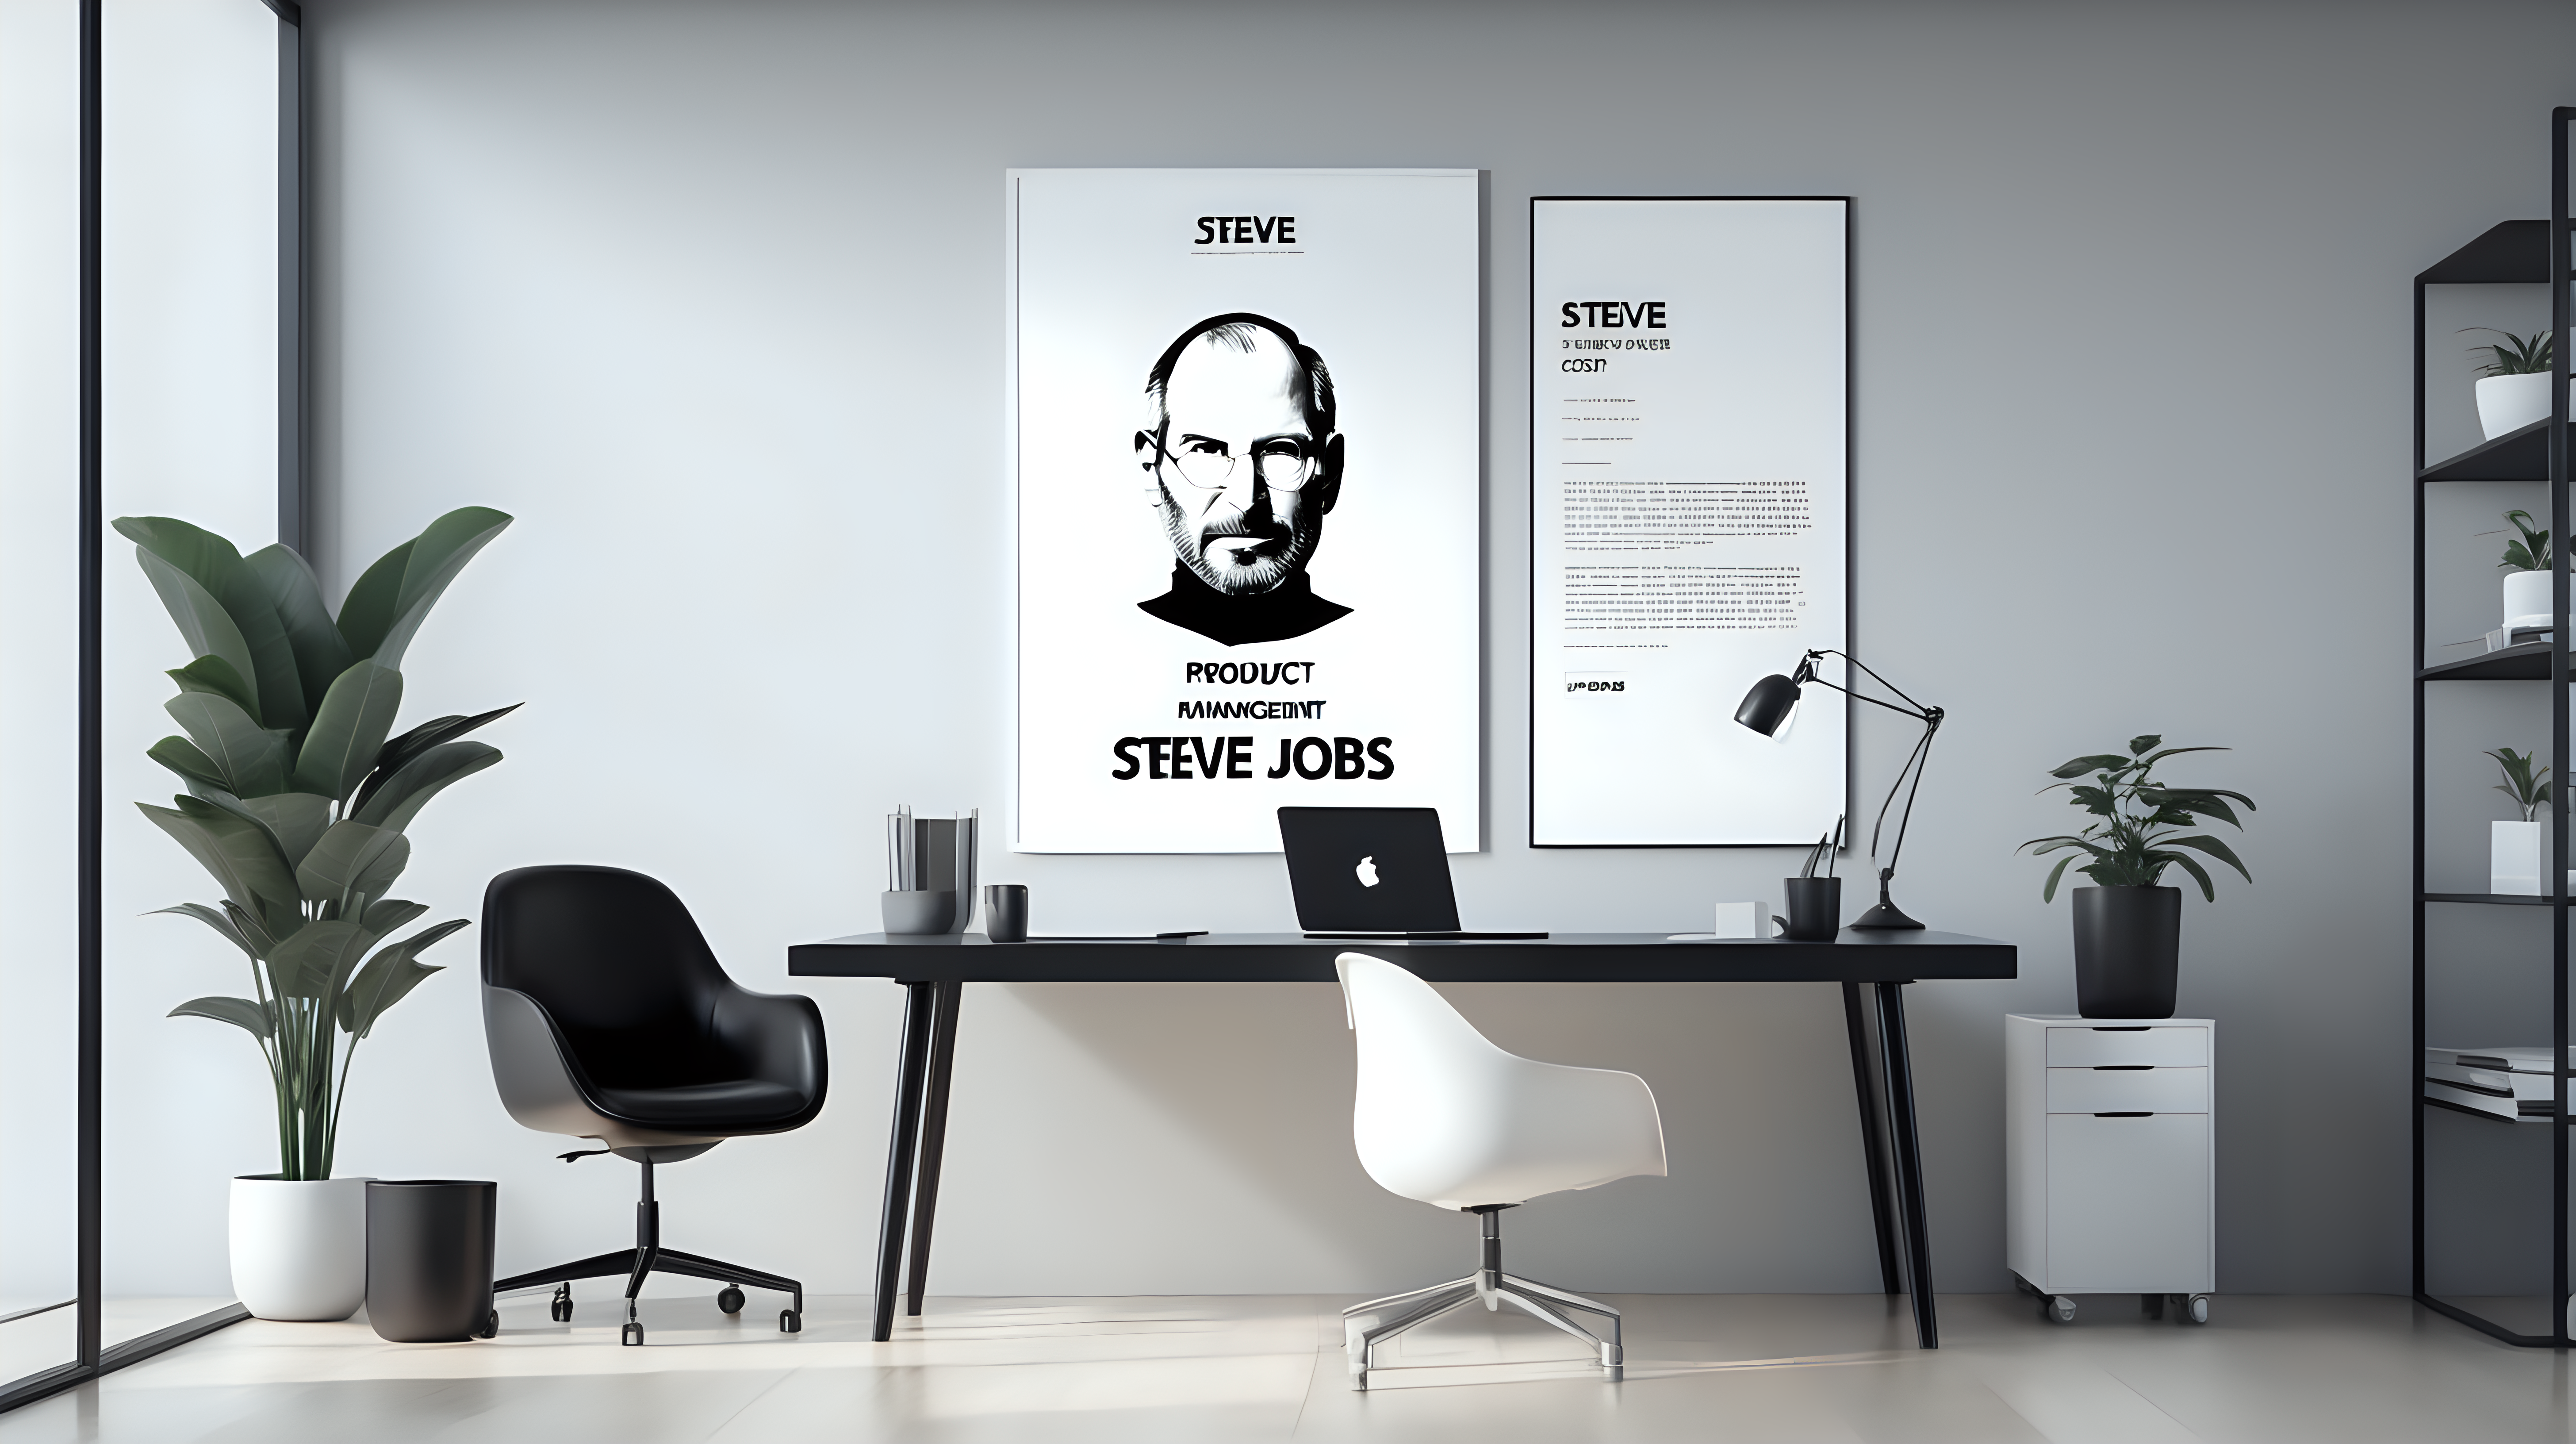 Minimalistic office with some furniture background for Tech product management online course. With Steve Jobs poster on the wall
